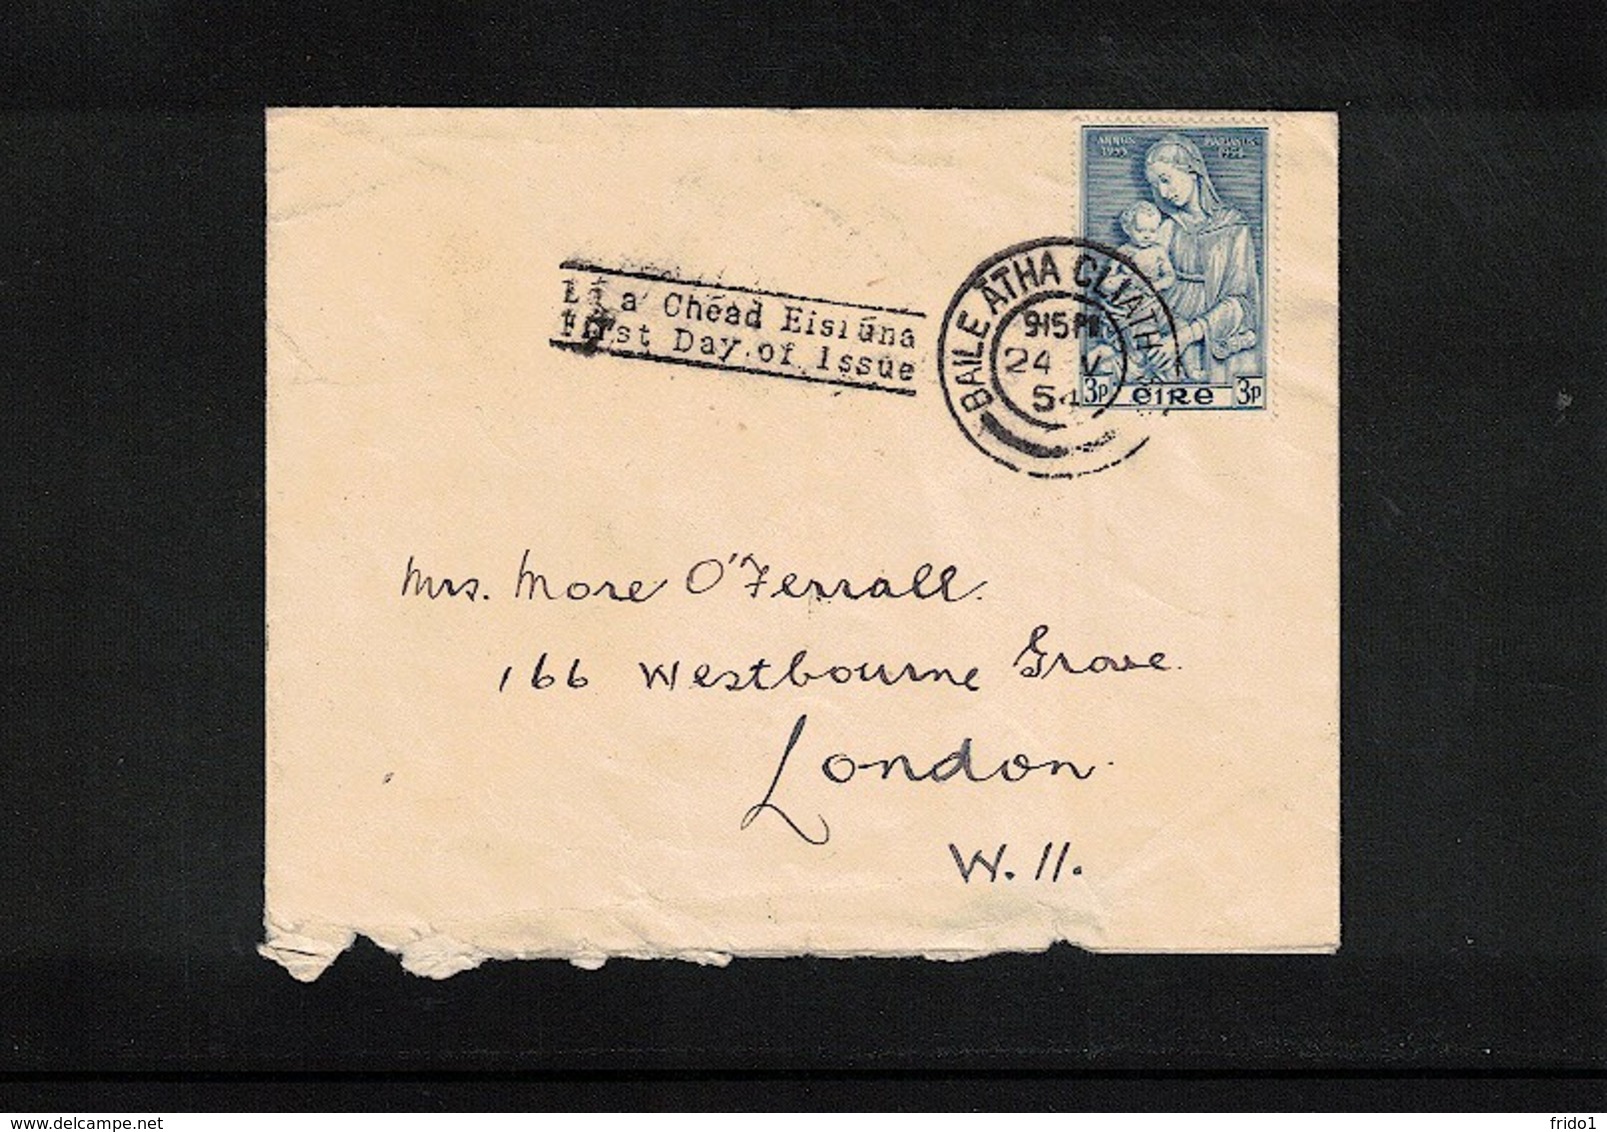 Ireland 1954 Interesting FDC Cover - Covers & Documents